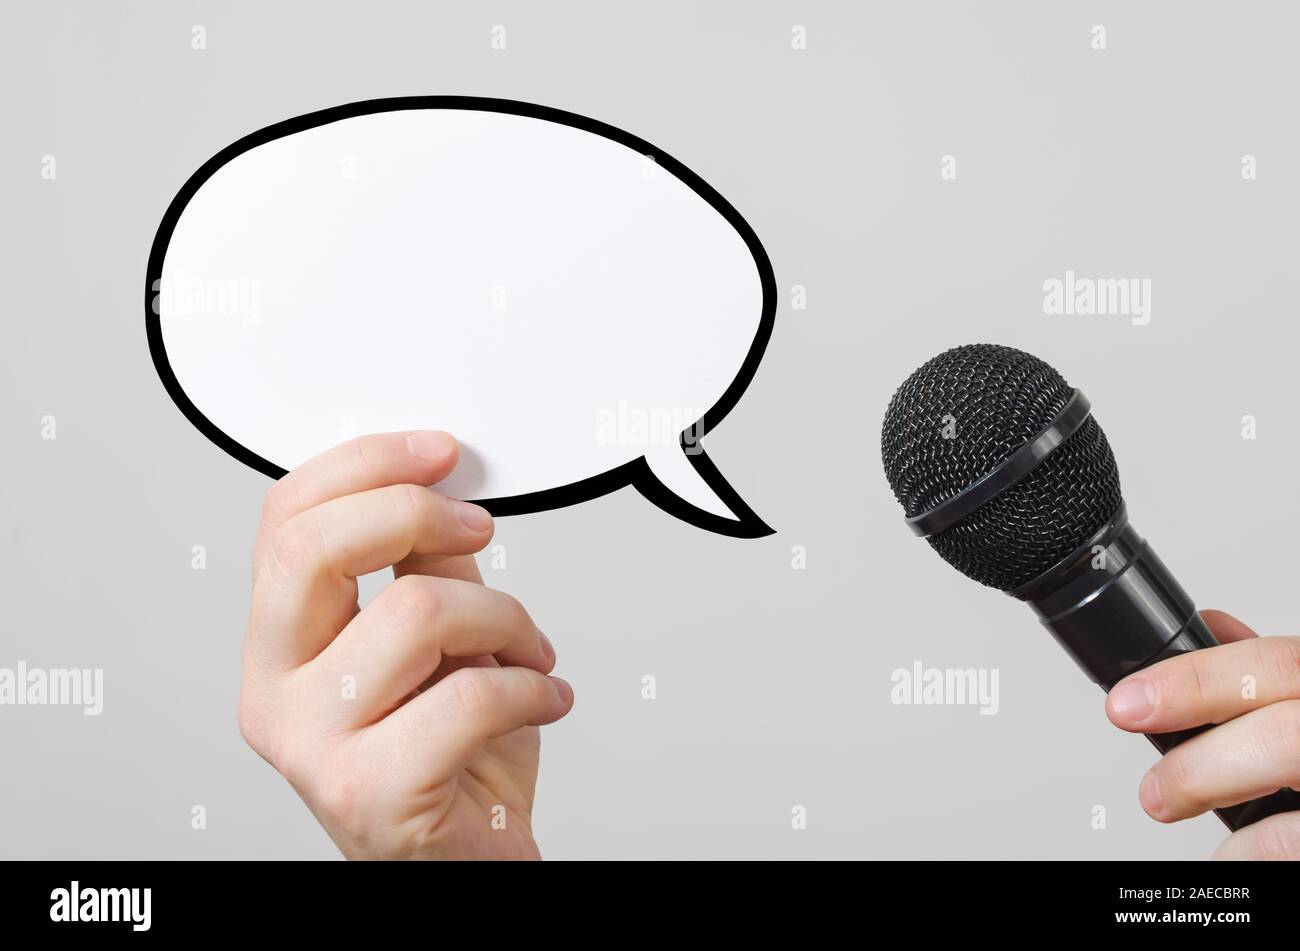 Hands holding a blank speech bubble and microphone. Conference, interview or social media concept with microphone and blank speech bubbles Stock Photo